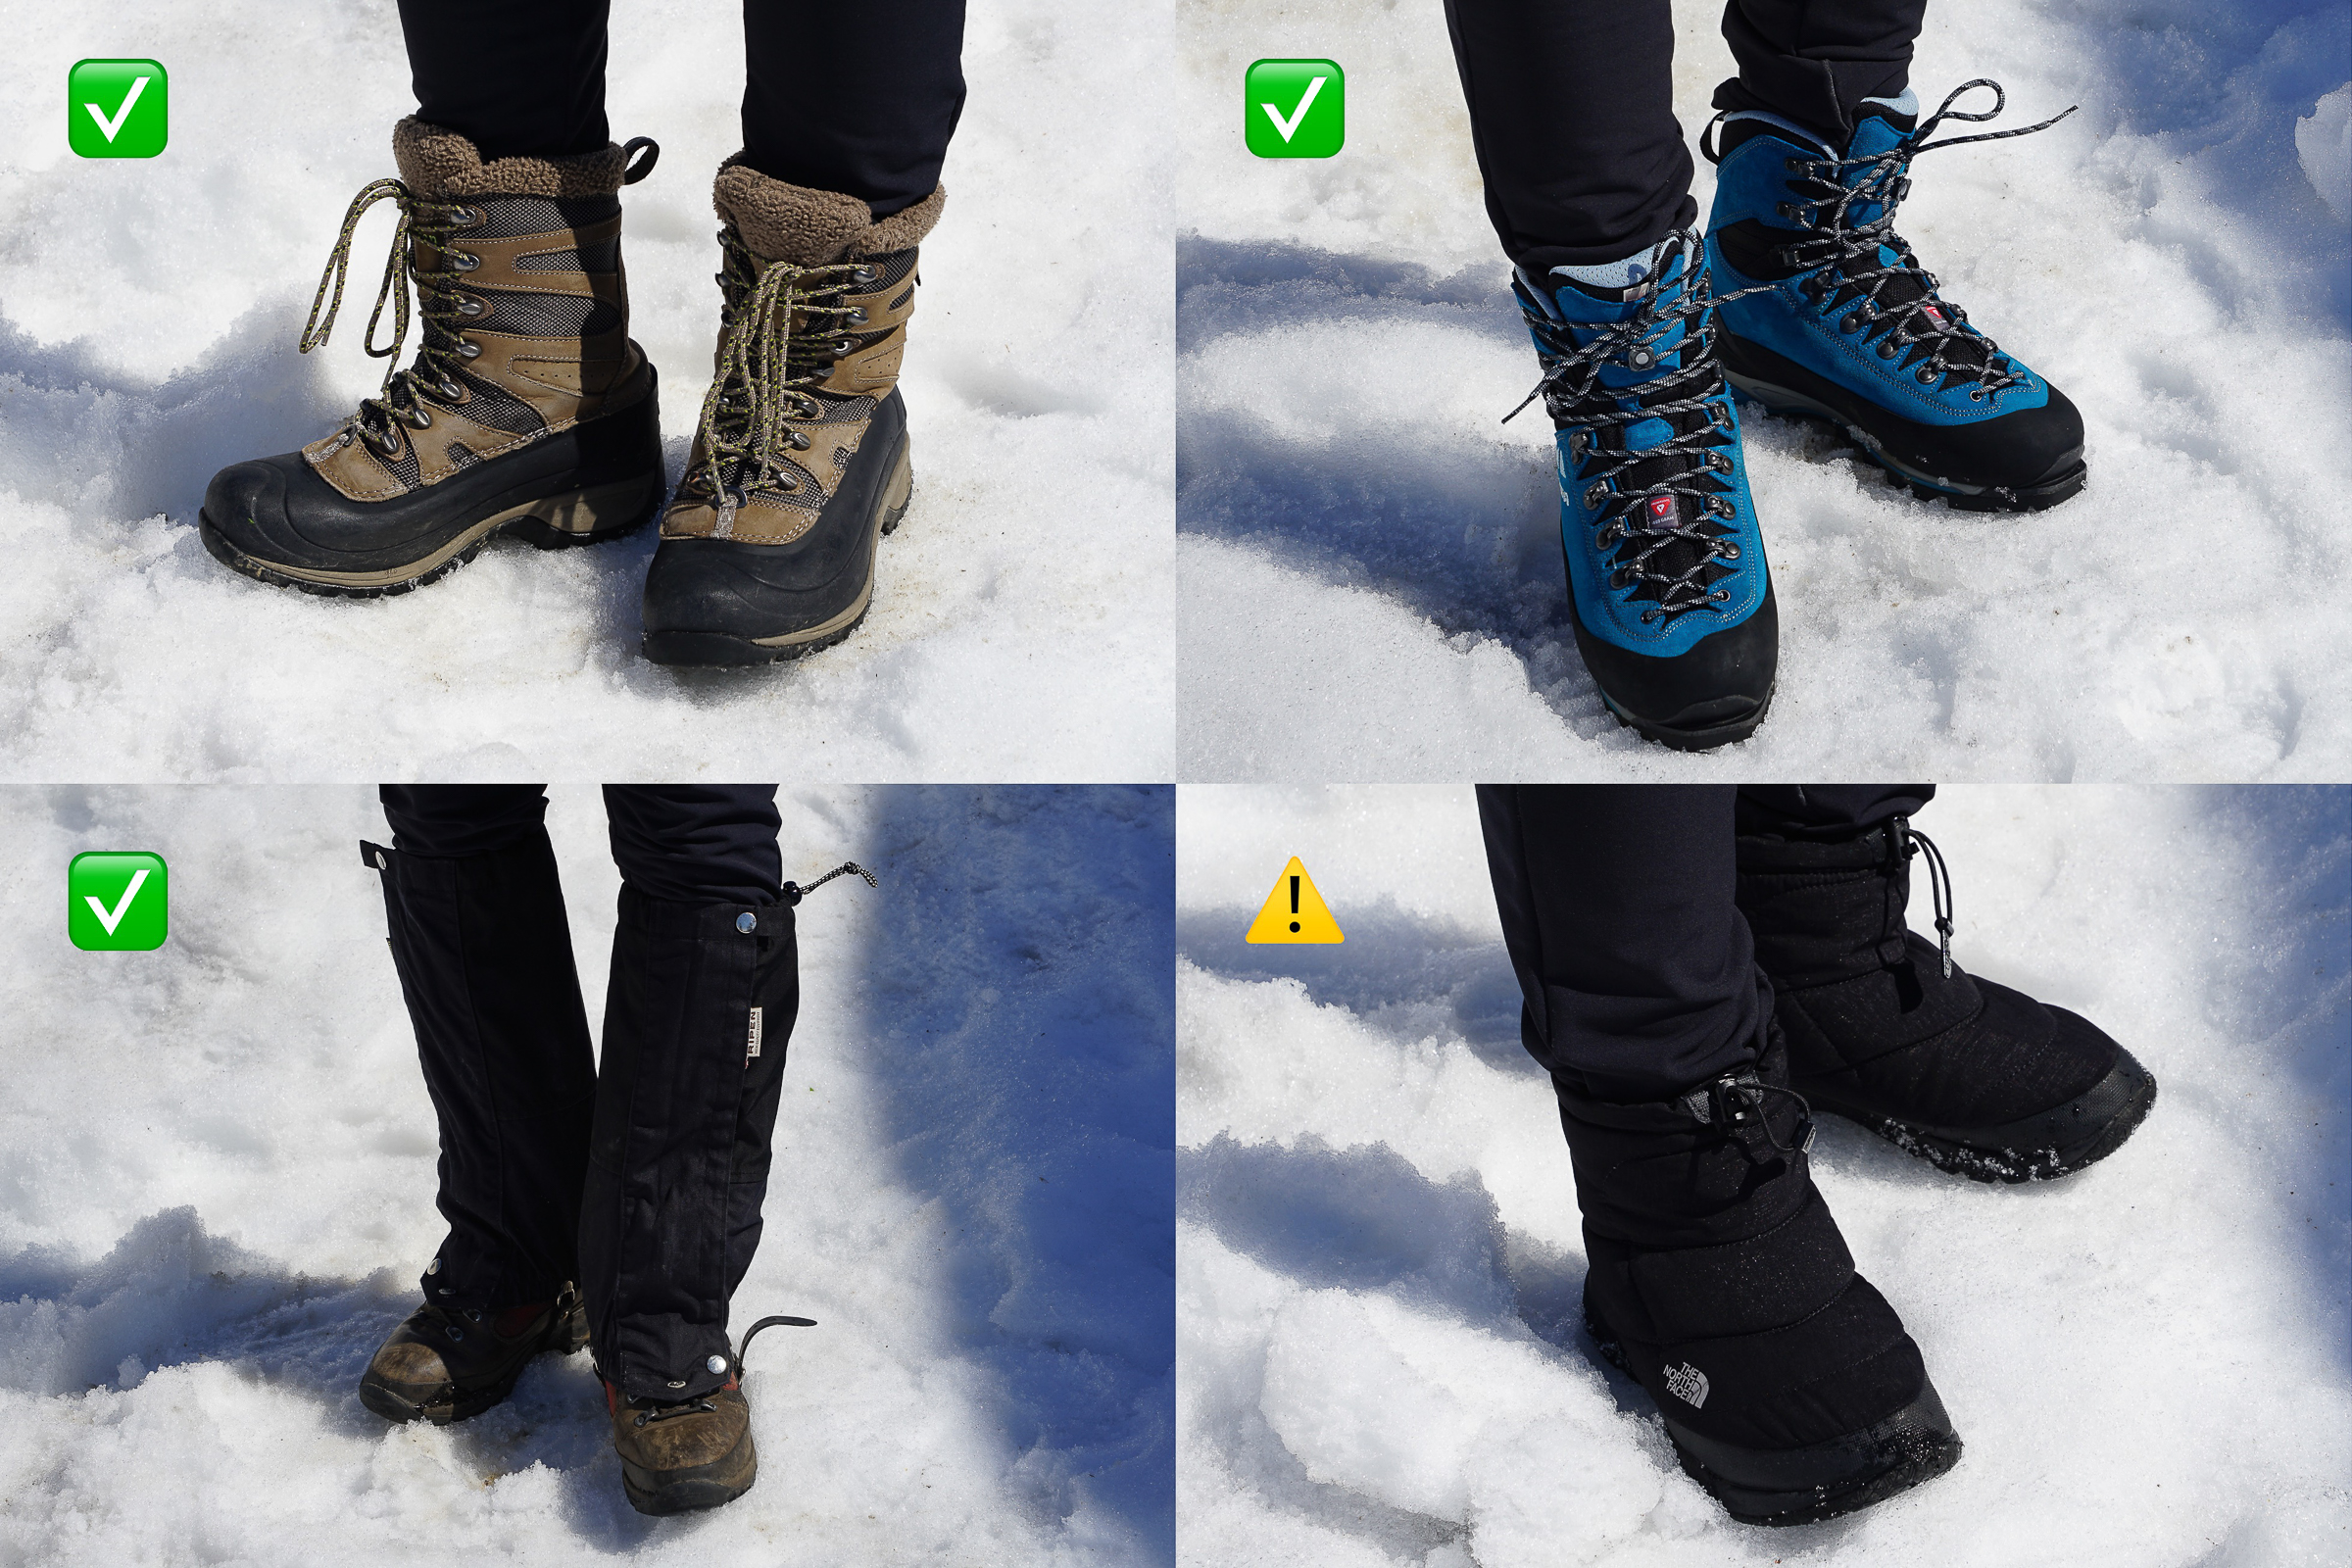 Three examples of winter footwear that are suitable for snowshoeing with one example of winter boots that are not suitable for snowshoeing.